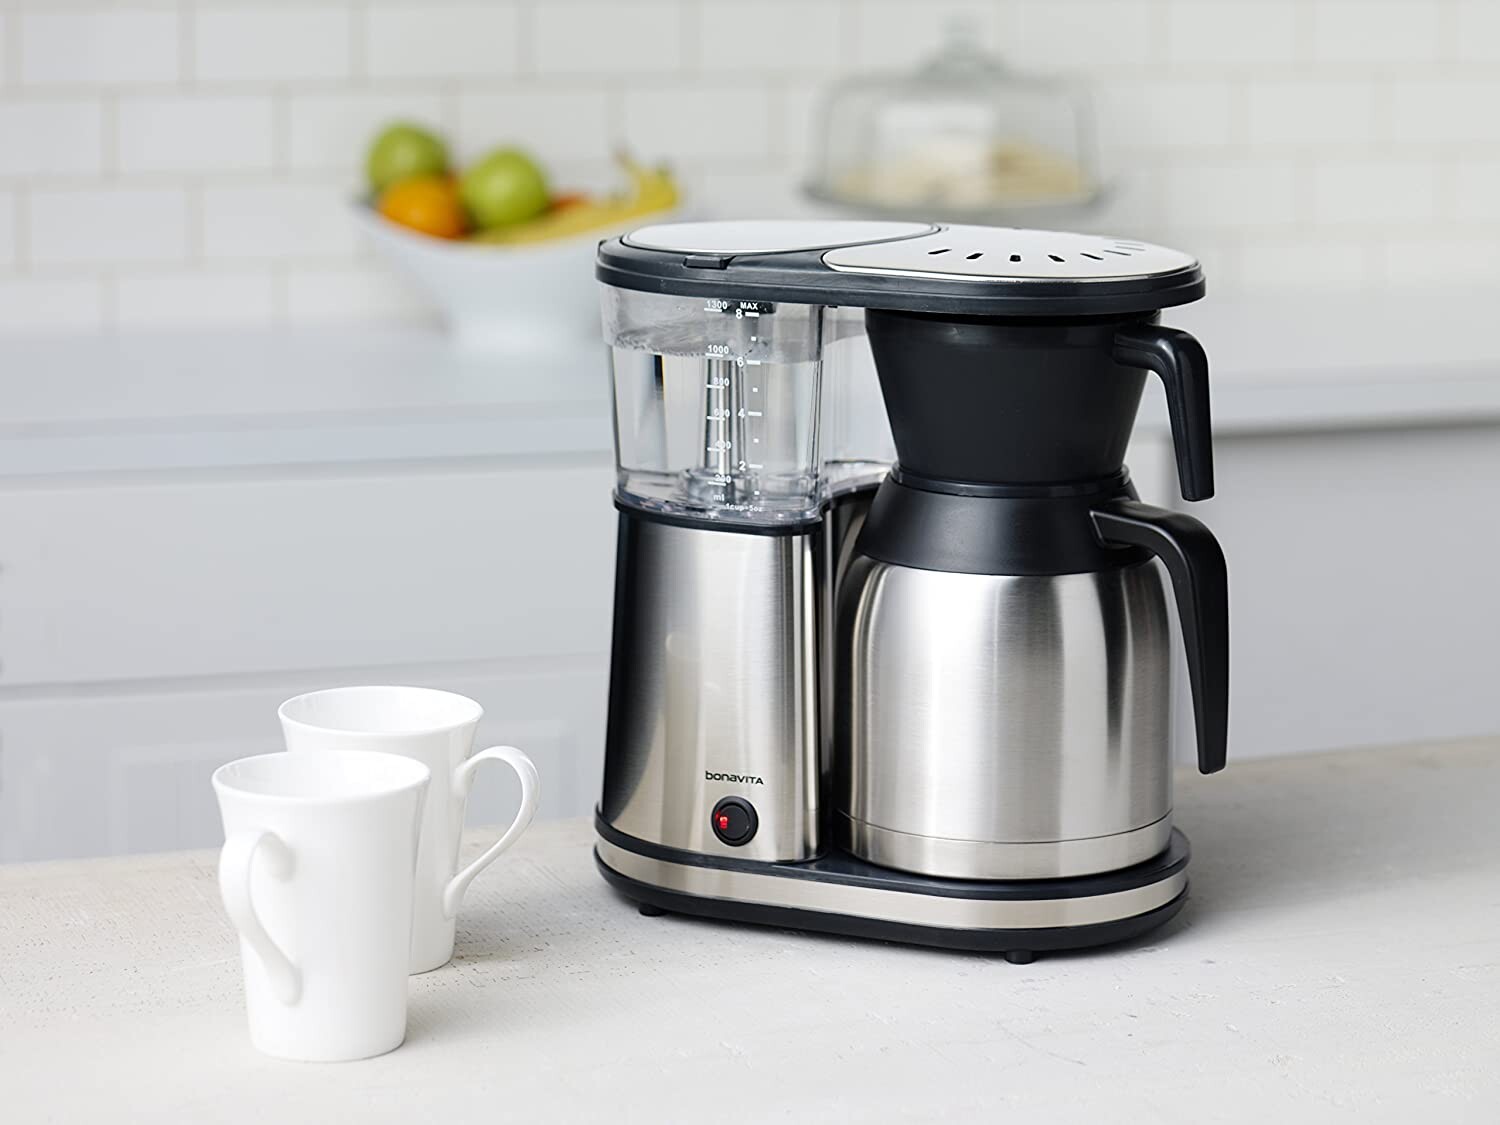 https://cdna.artstation.com/p/assets/images/images/032/442/244/large/top-rated-coffee-makers-ywswbe7.jpg?1606444842